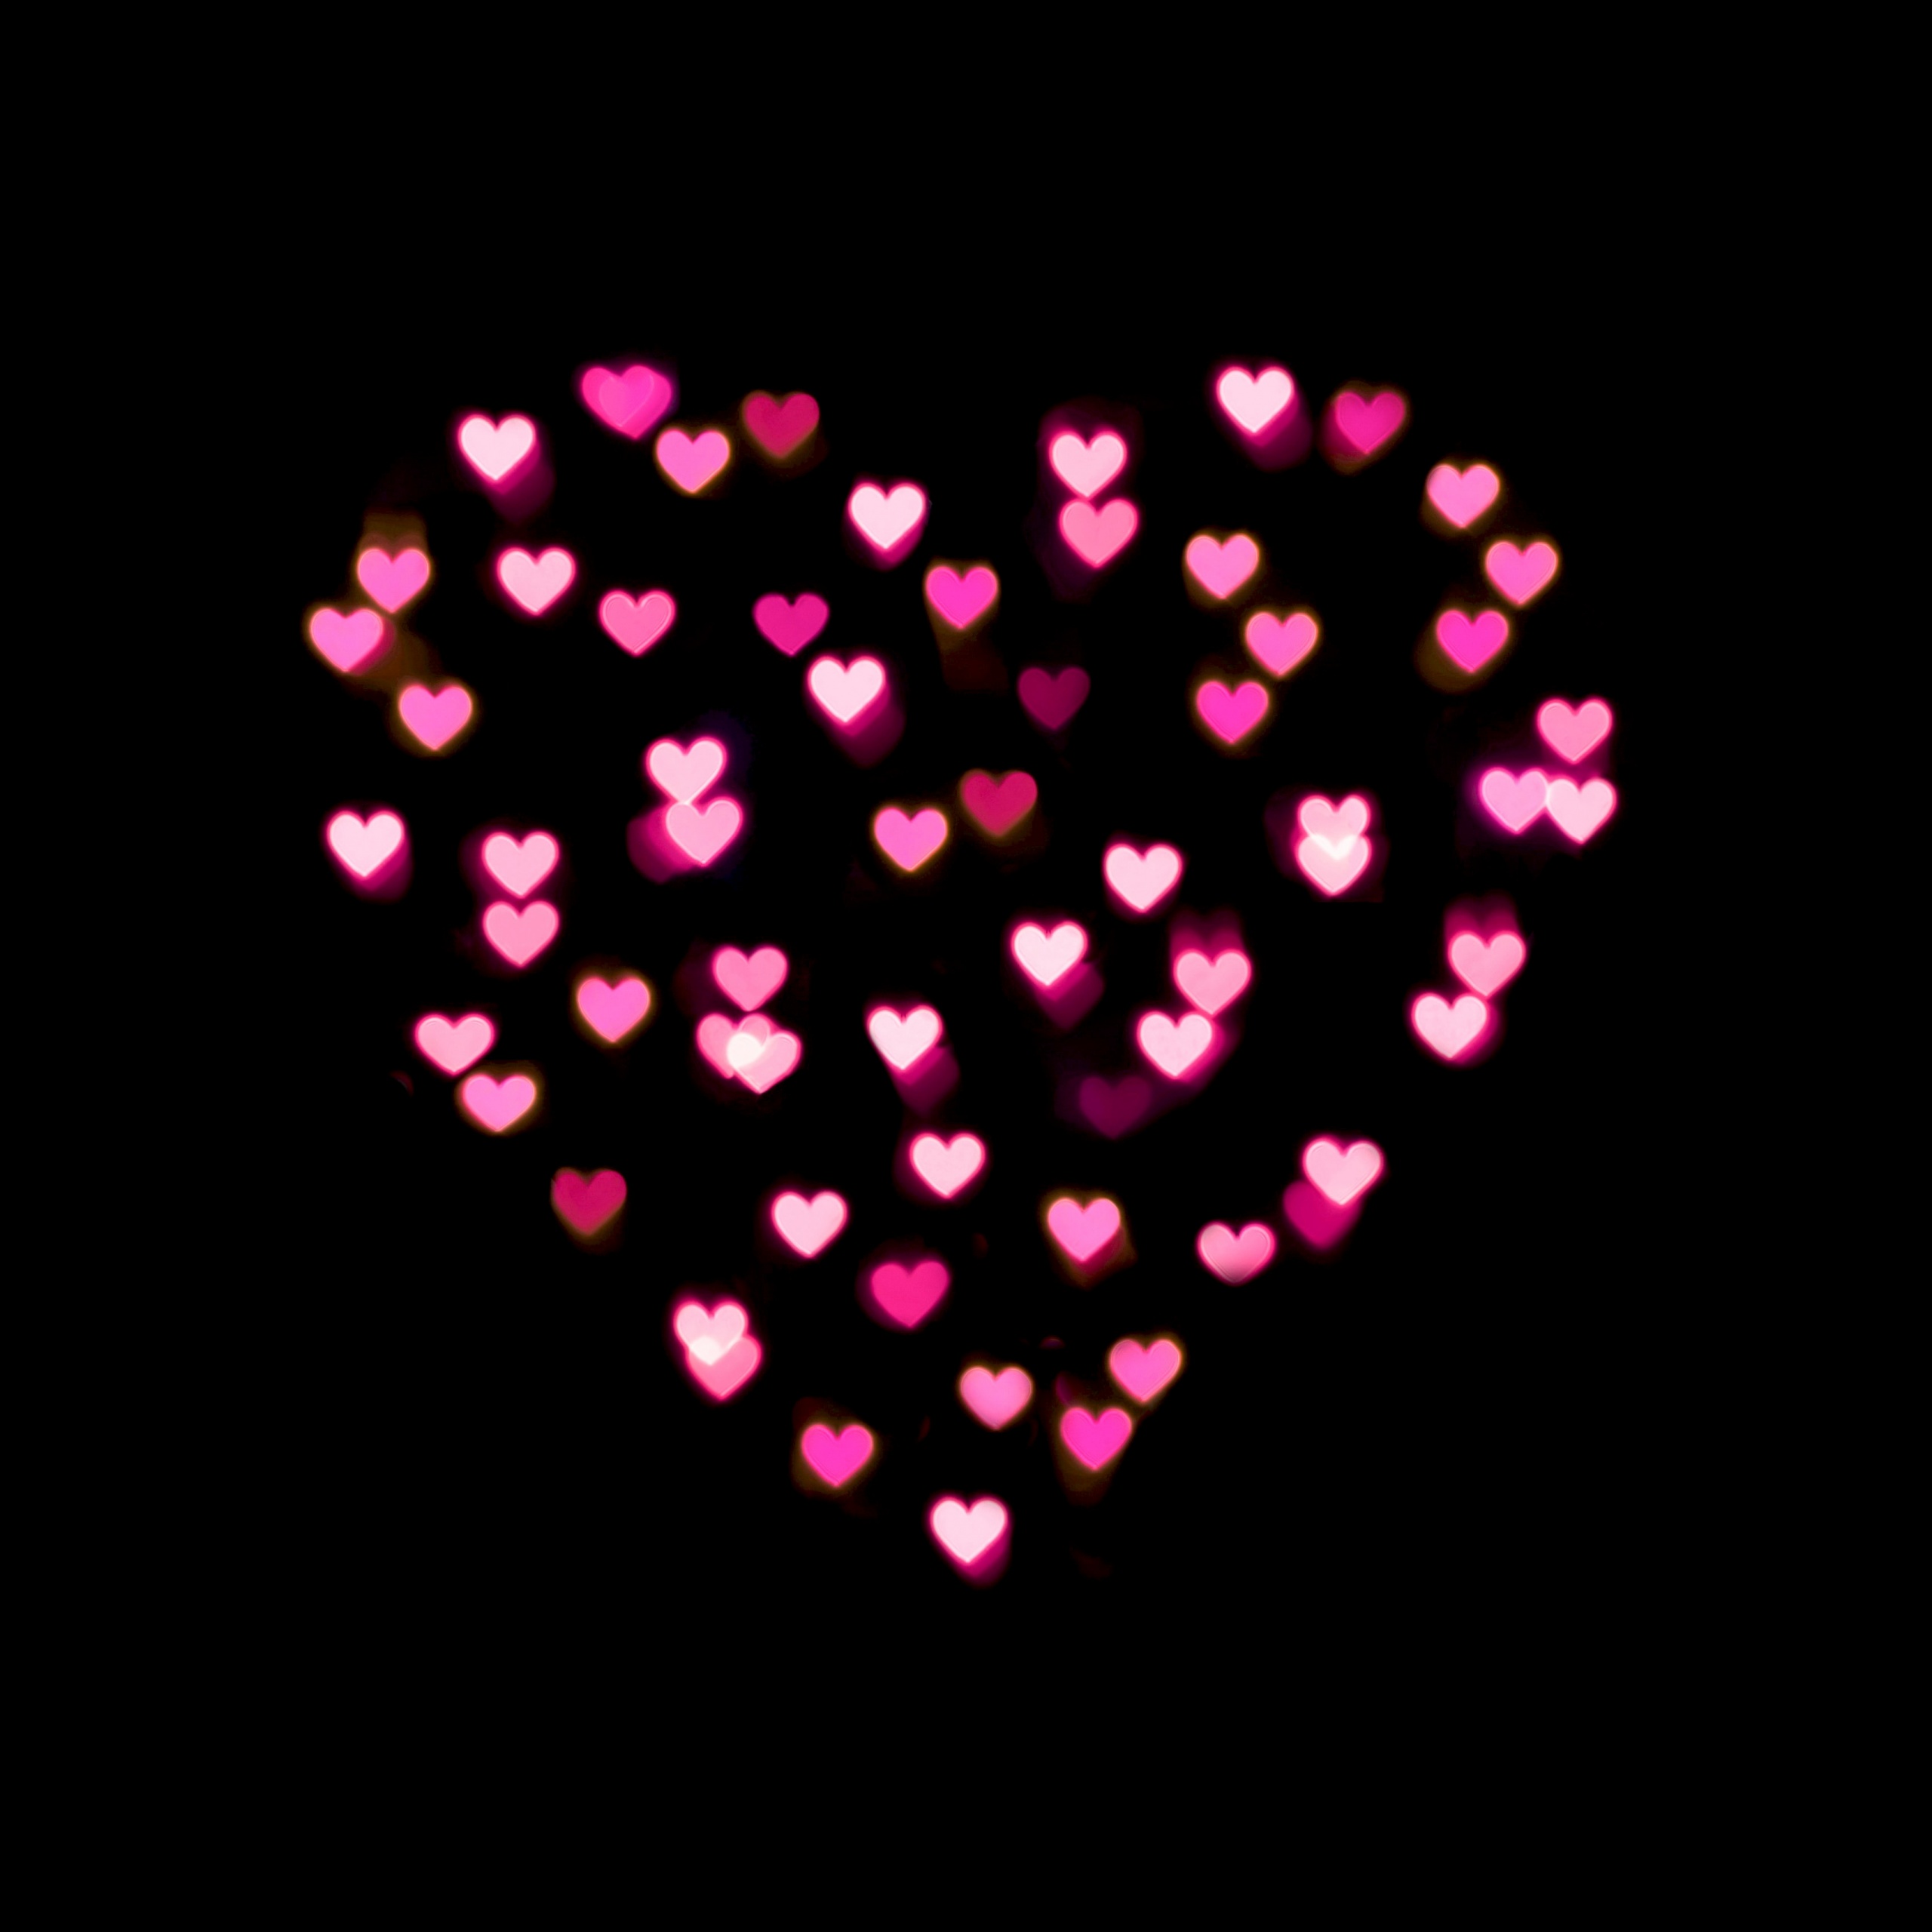 A heart shaped pattern of pink hearts on black background - Black heart, pink heart